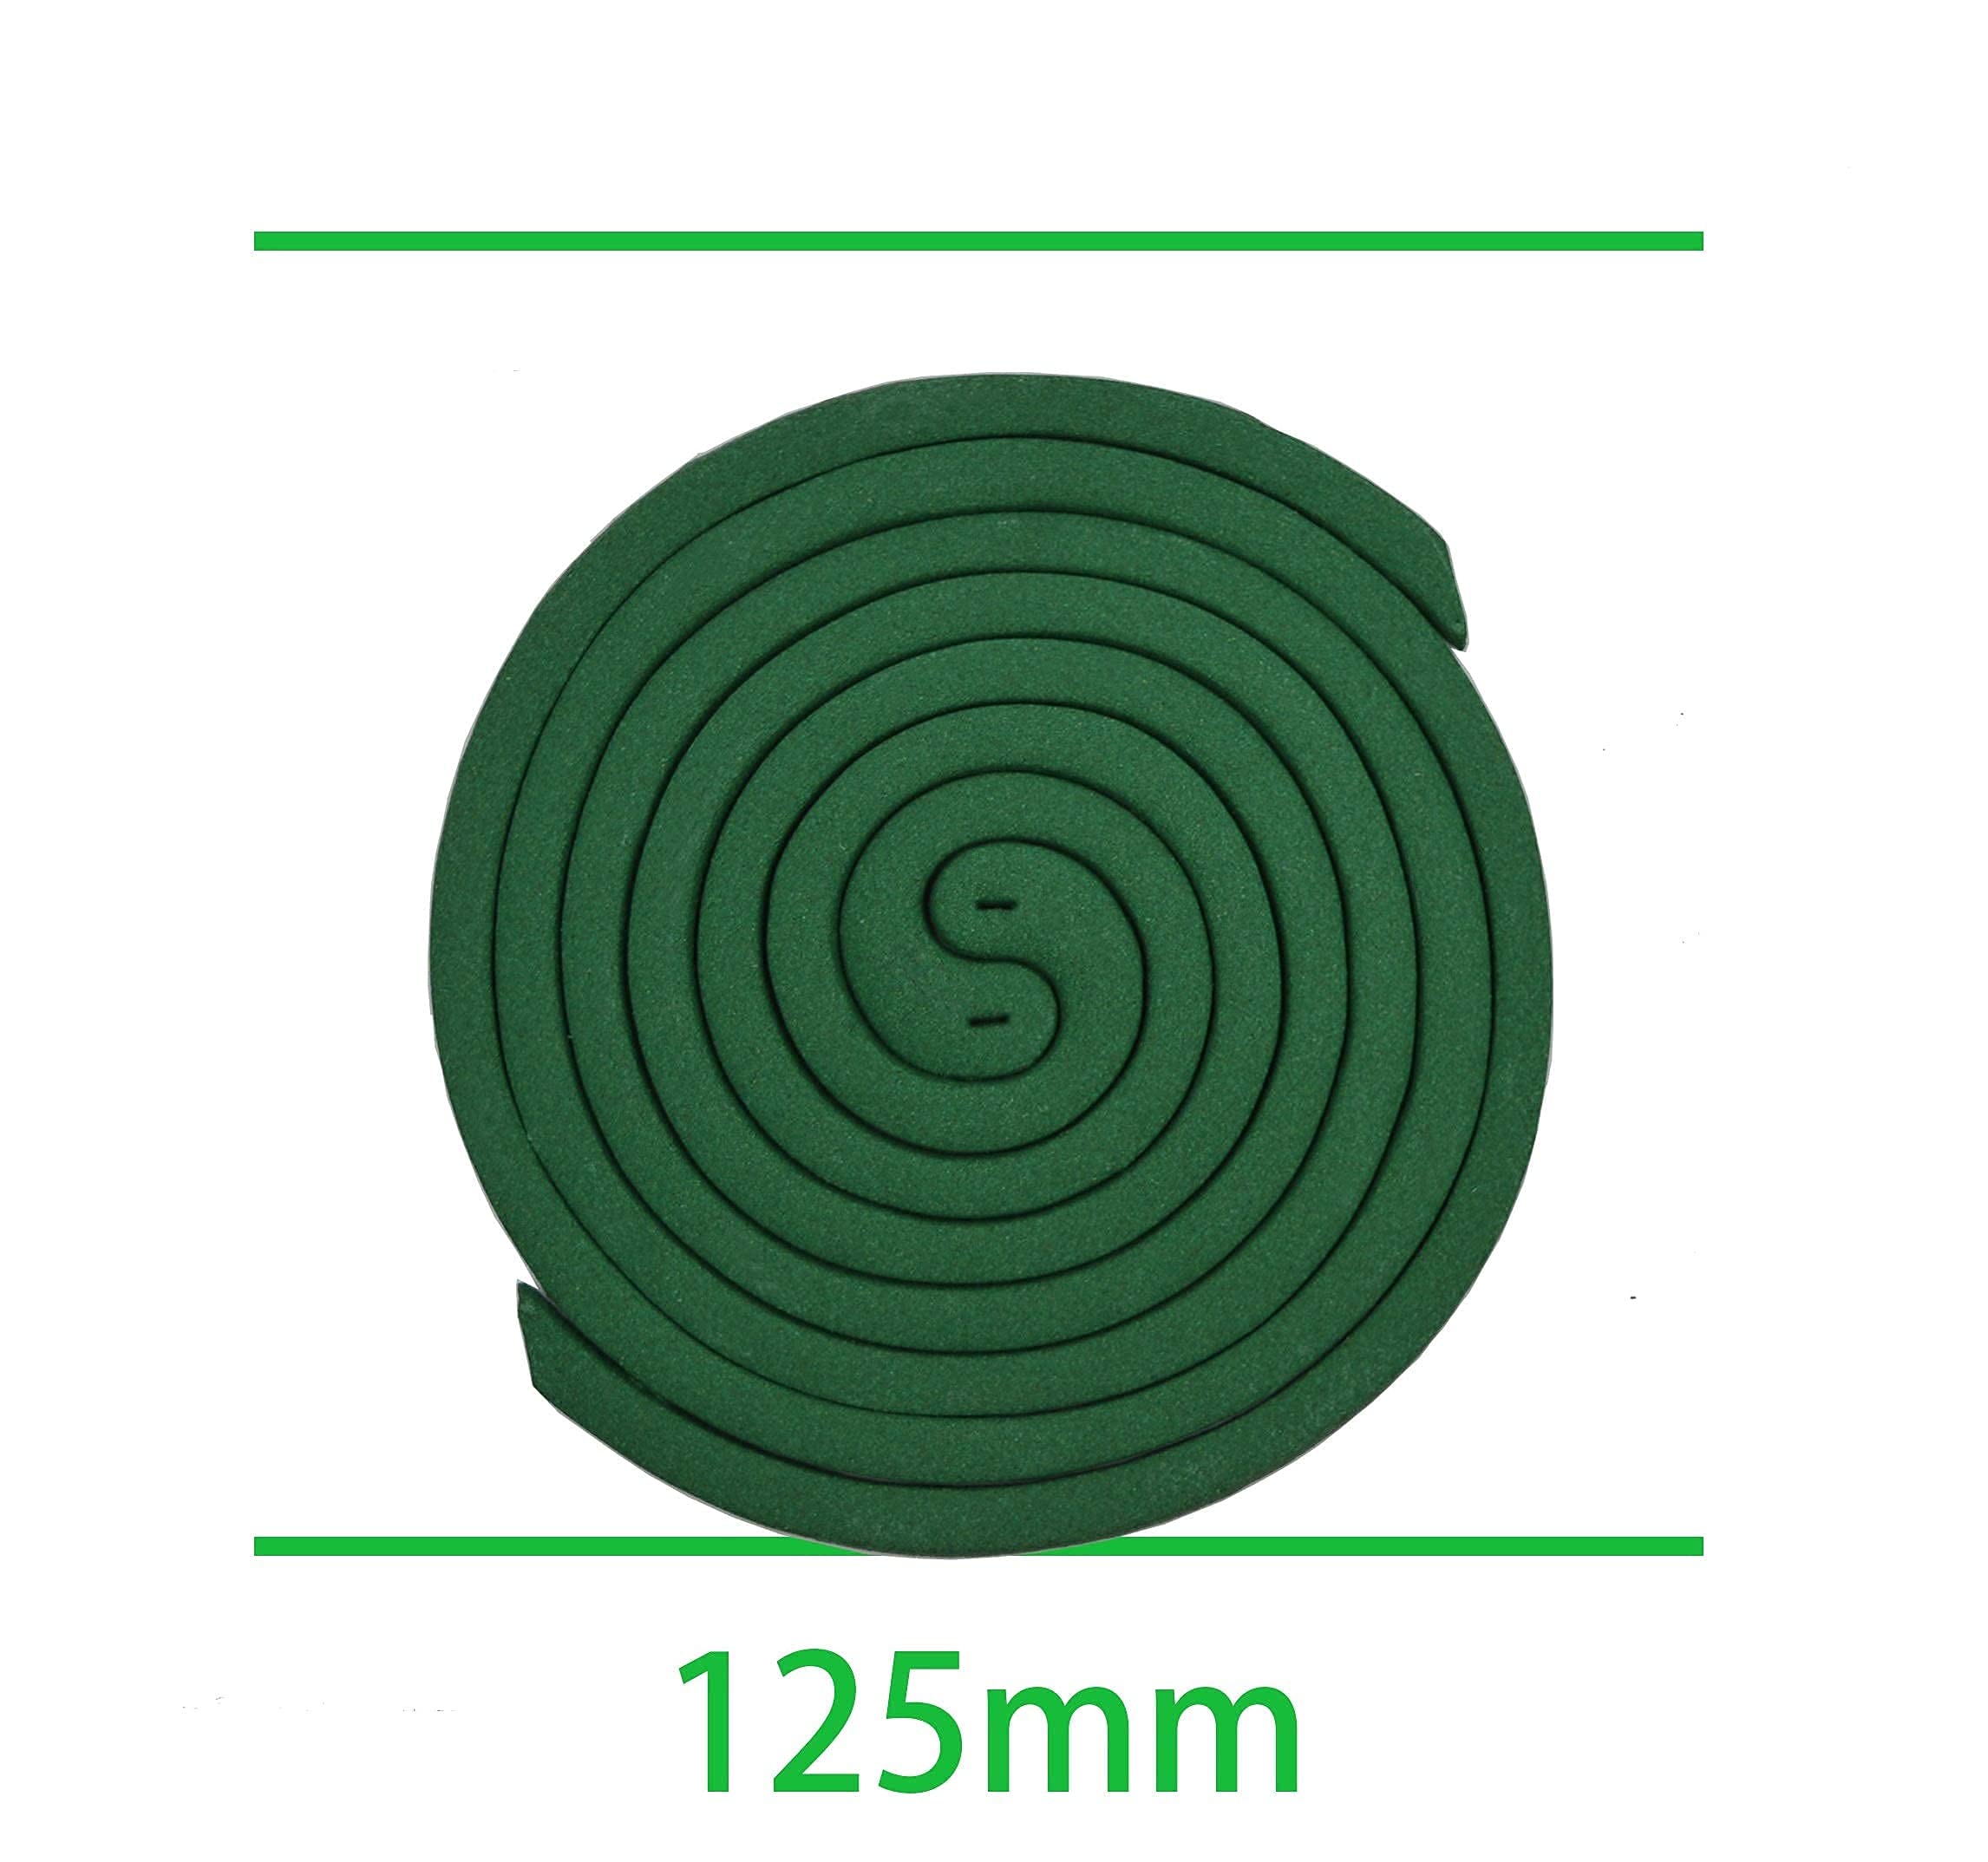 Citronella Coils - Outdoor Use - Each Coil could last for 5-7 Hours - 2 Pack Contains 16 coils & 2 Coil Stands